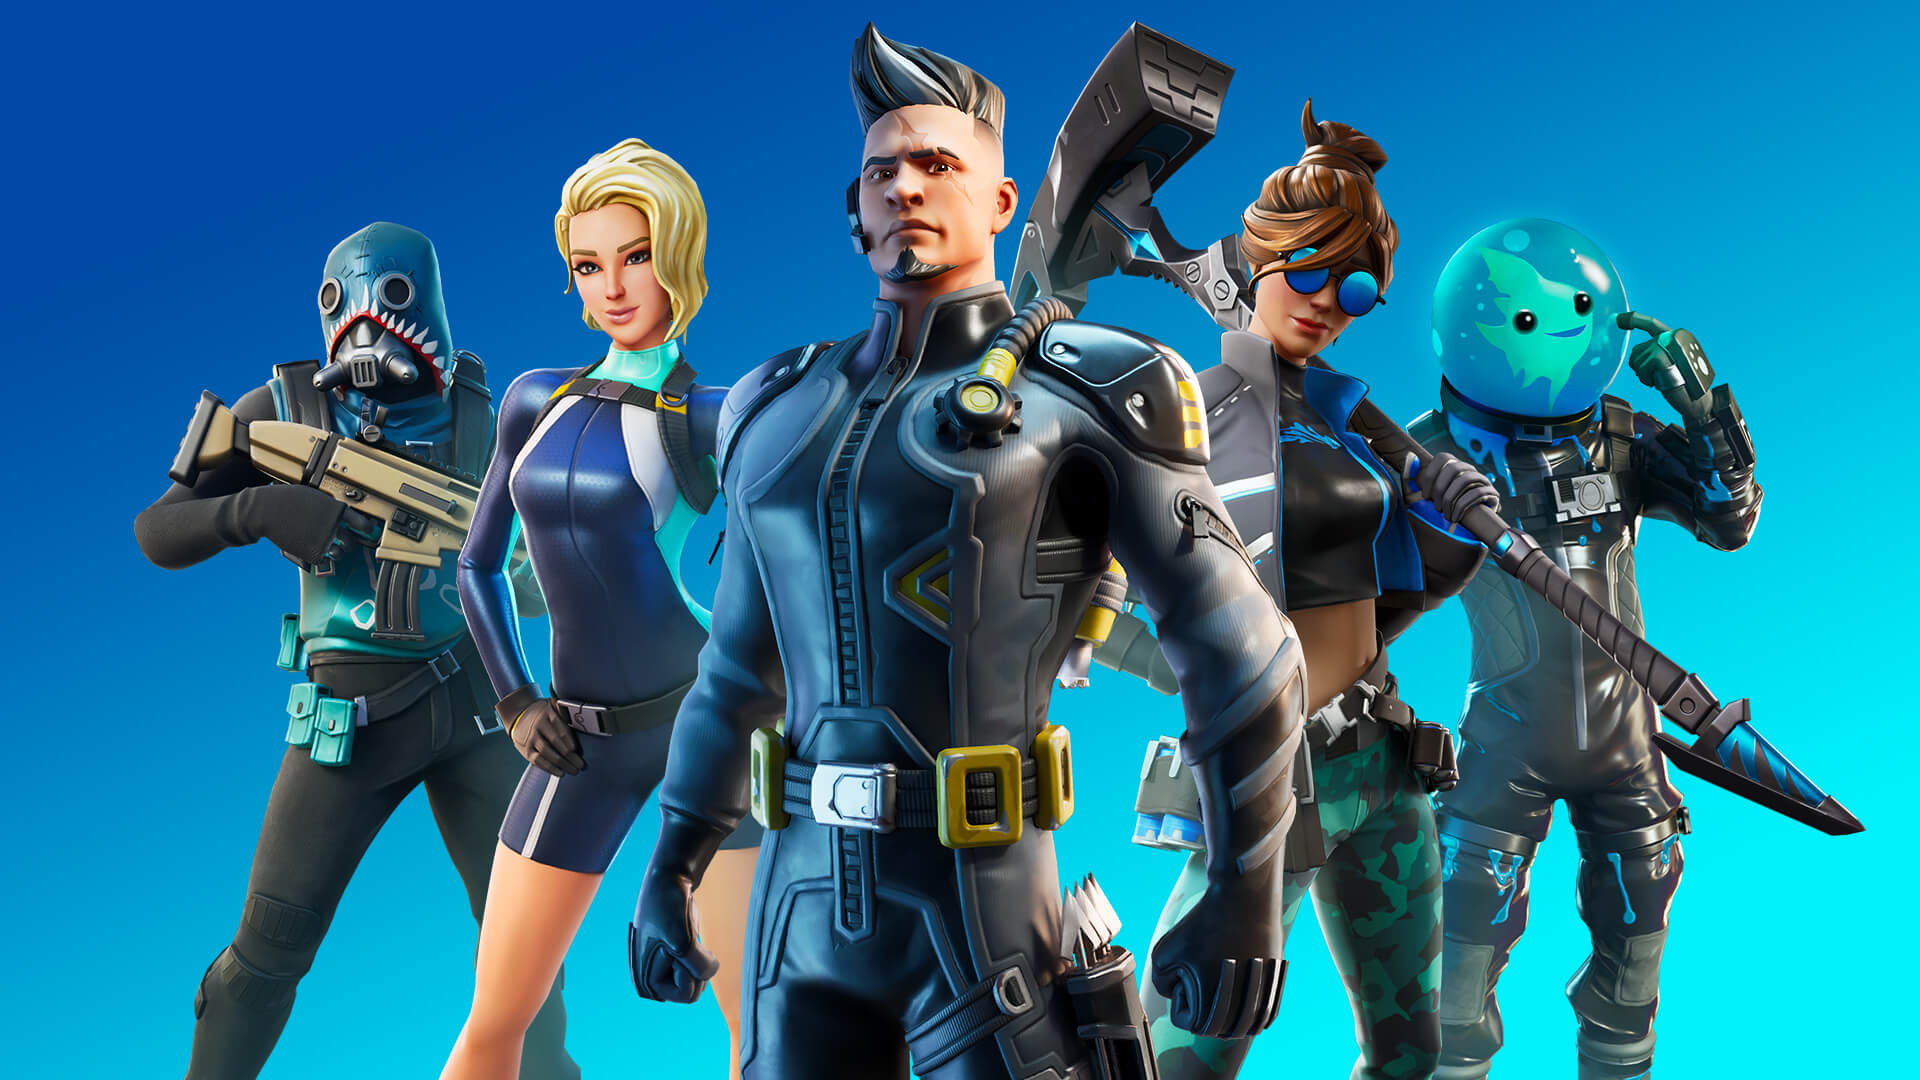 Fortnite The Creative 17.20 update: Find the complete patch notes, preferred item slots, Bugha mode and much more